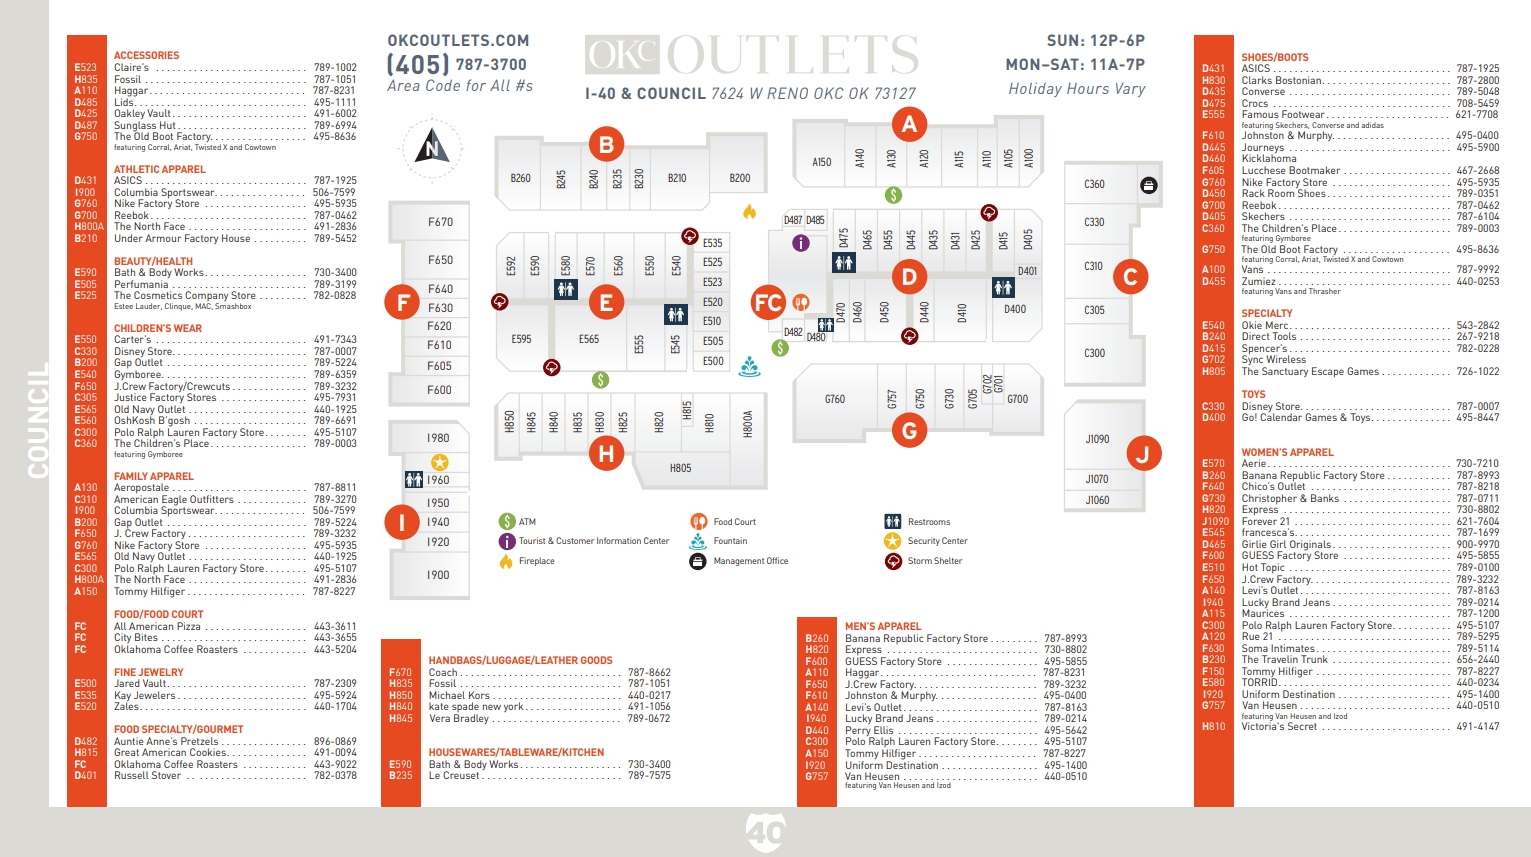 Outlet Shoppes at Oklahoma City (OKC Outlets) (85 stores) - outlet shopping in Oklahoma City ...